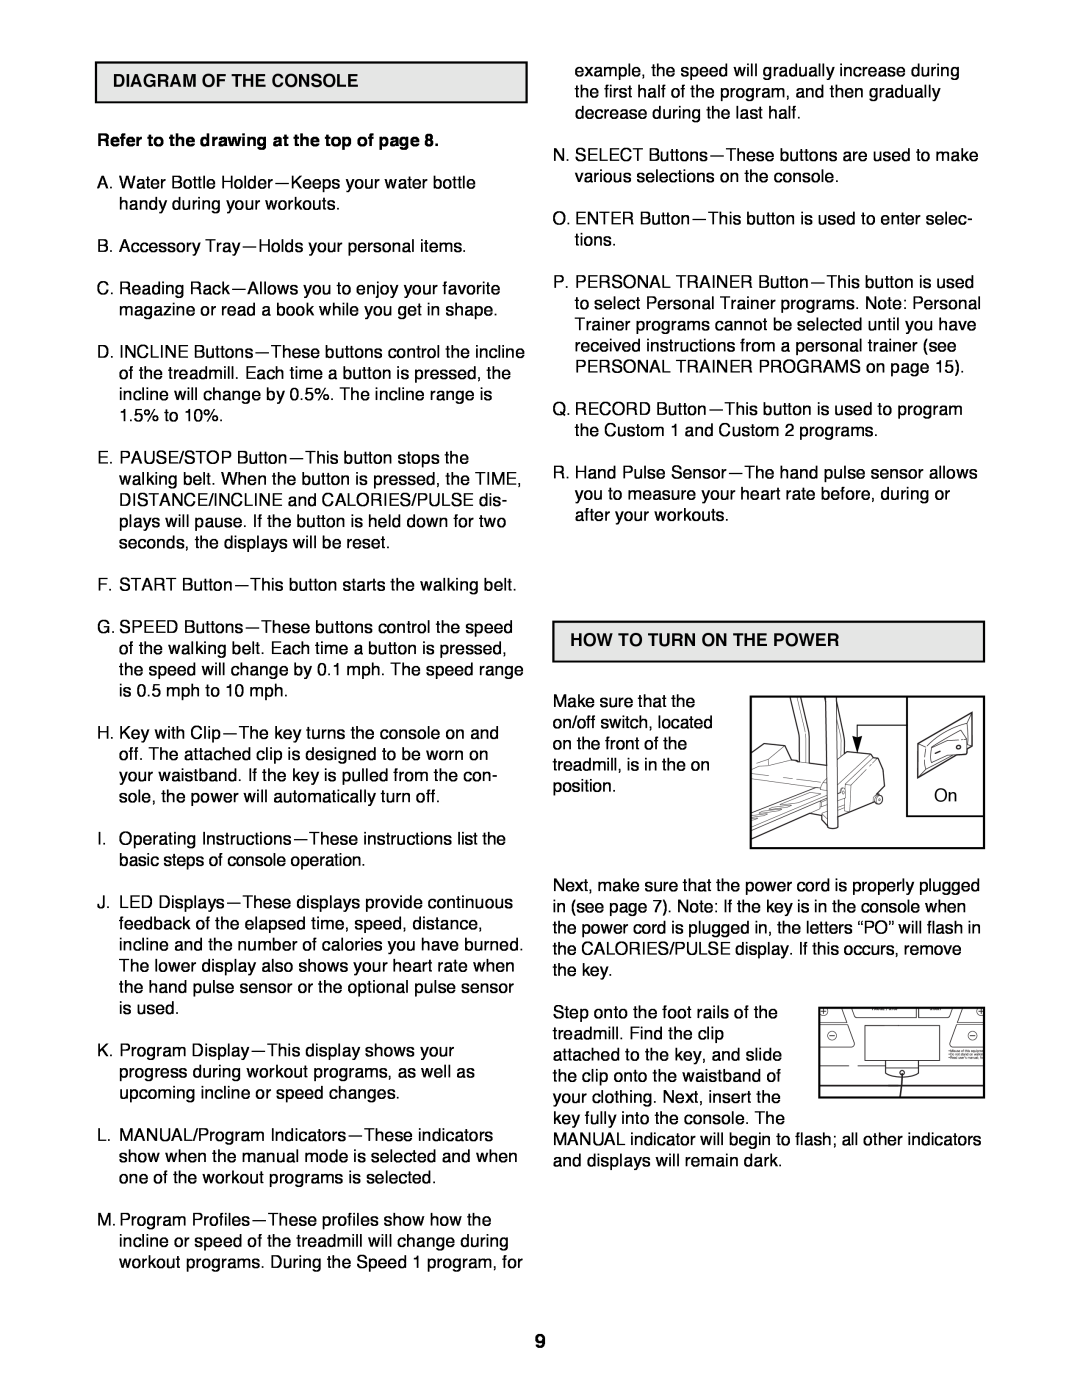 Healthrider HRTL14980 manual DIAGRAM OF THE CONSOLE Refer to the drawing at the top of page, How To Turn On The Power 